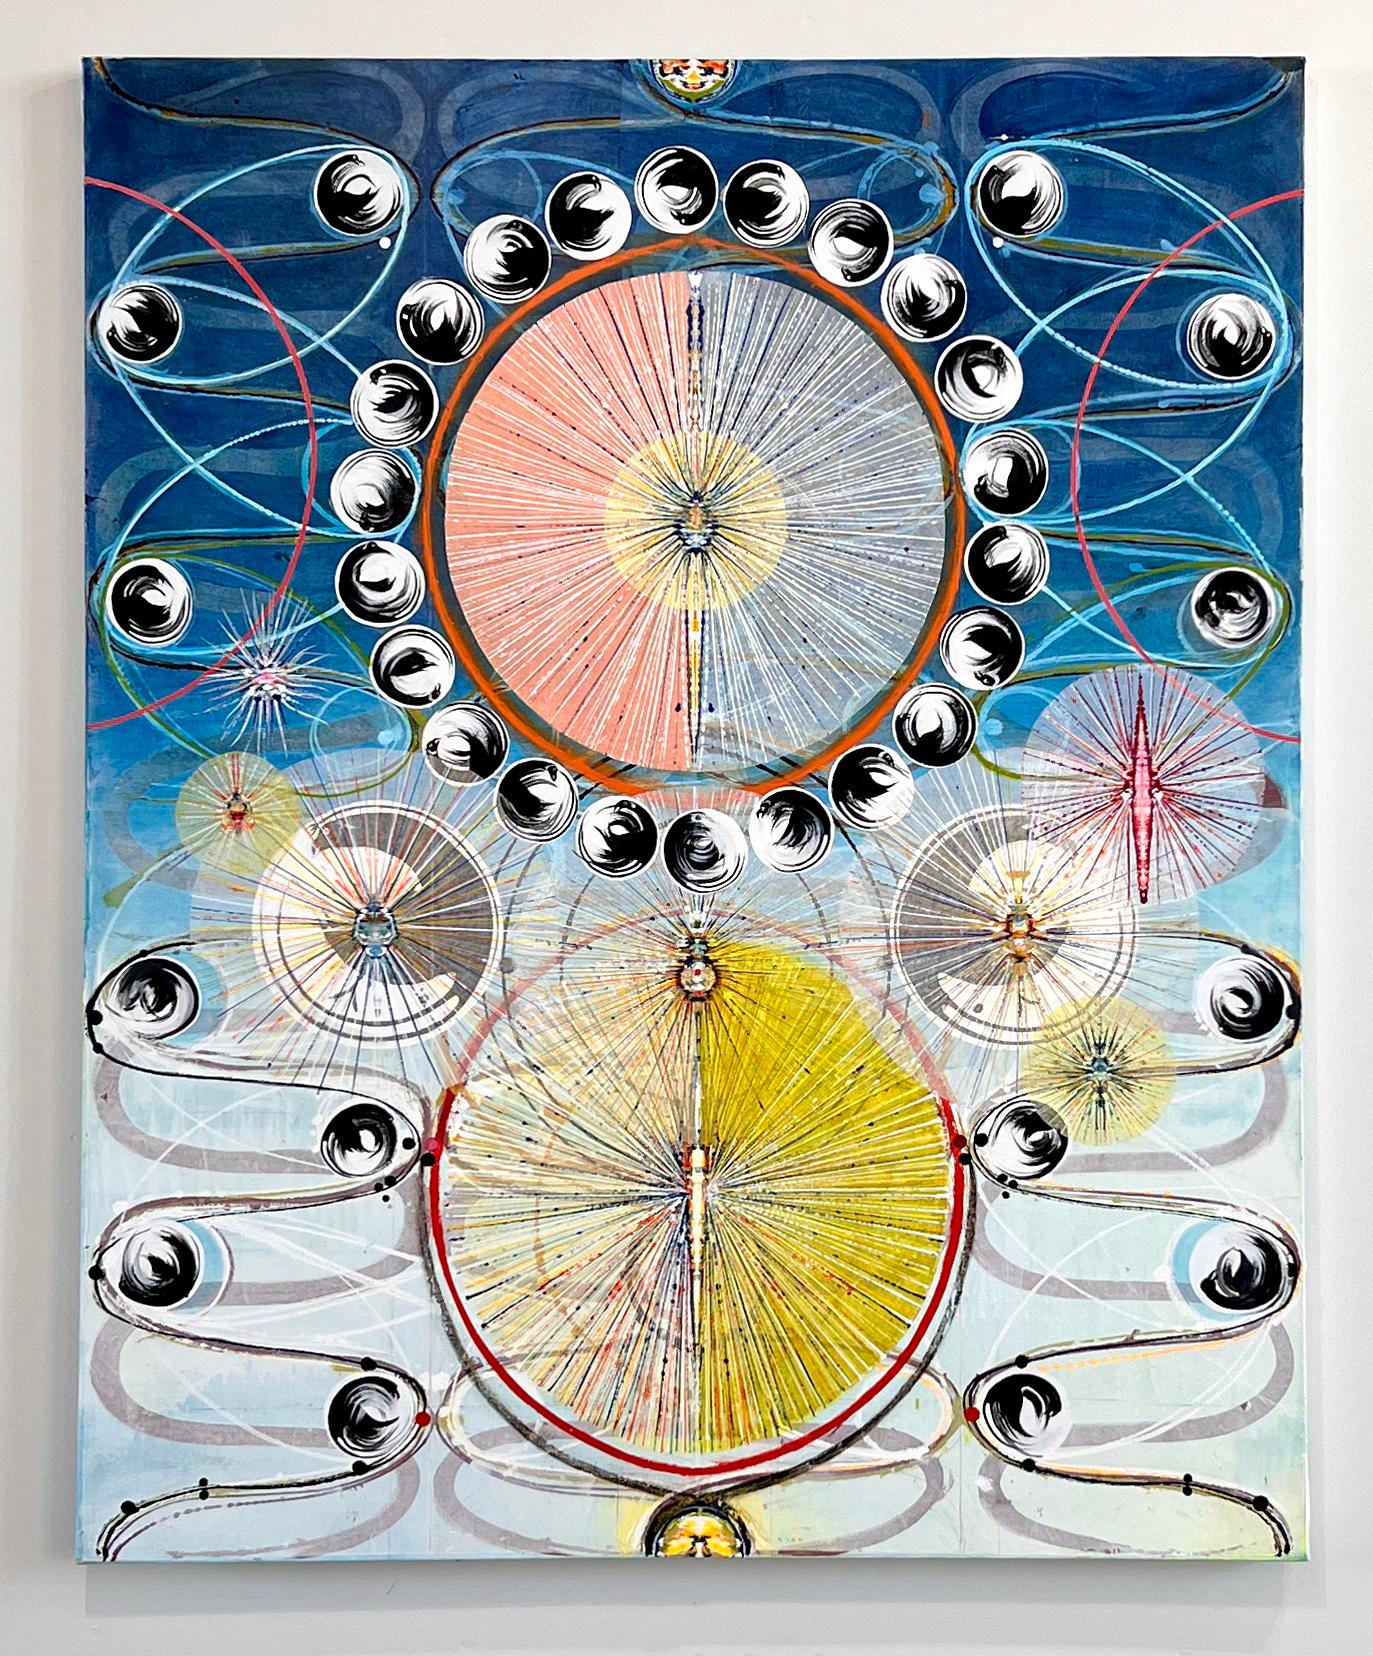 Susan Chrysler White Abstract Painting - Raven's Wheel, Black and White Circles, Swirling Lines Navy Blue, Pink, Yellow